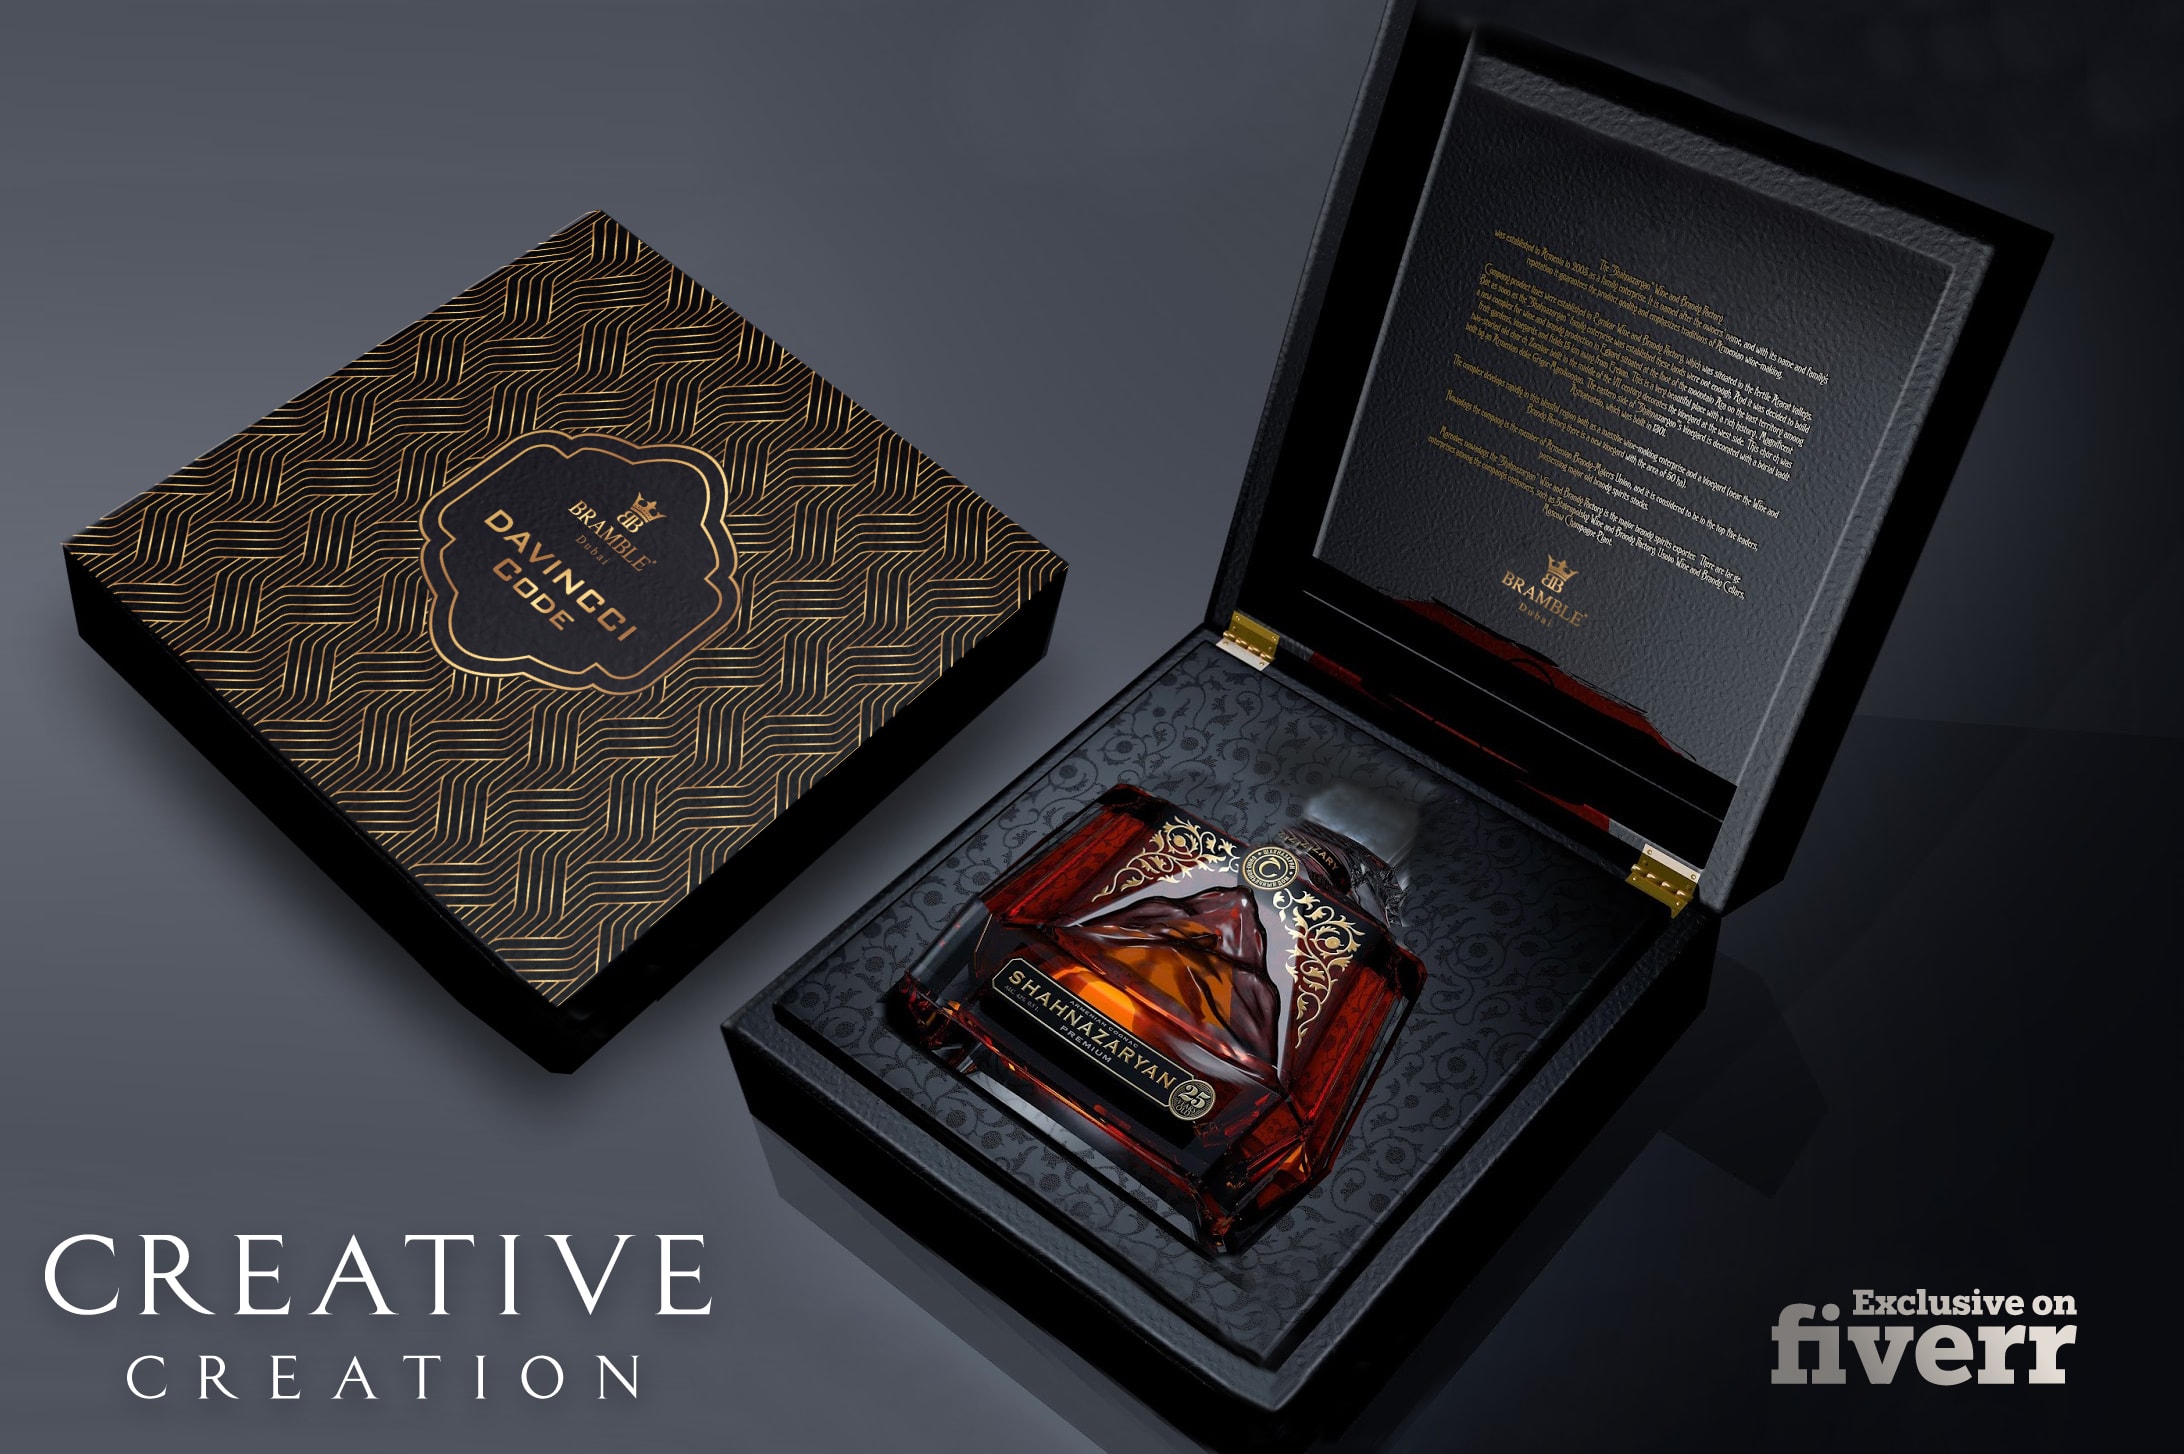 Design Luxury Perfume Packaging By Creative Creat Fiverr